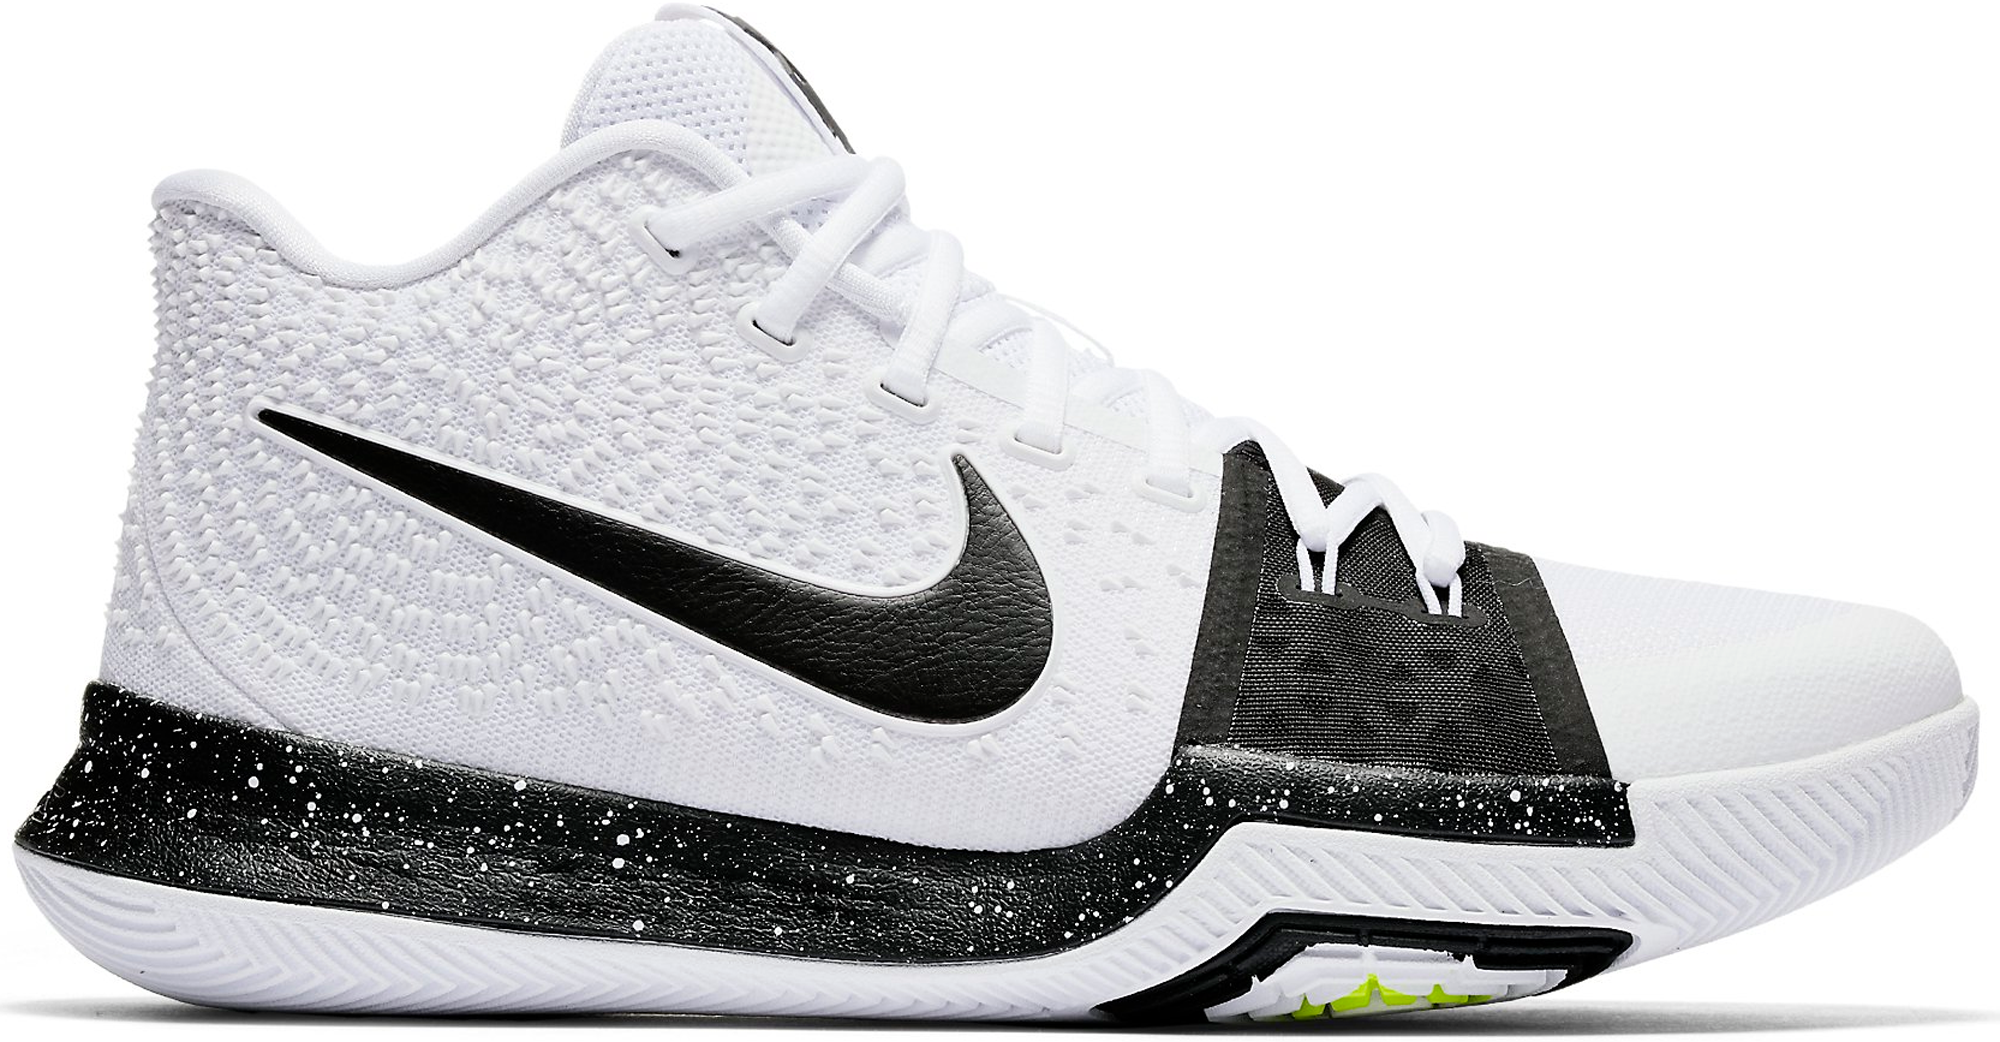 kyrie 3 black and white